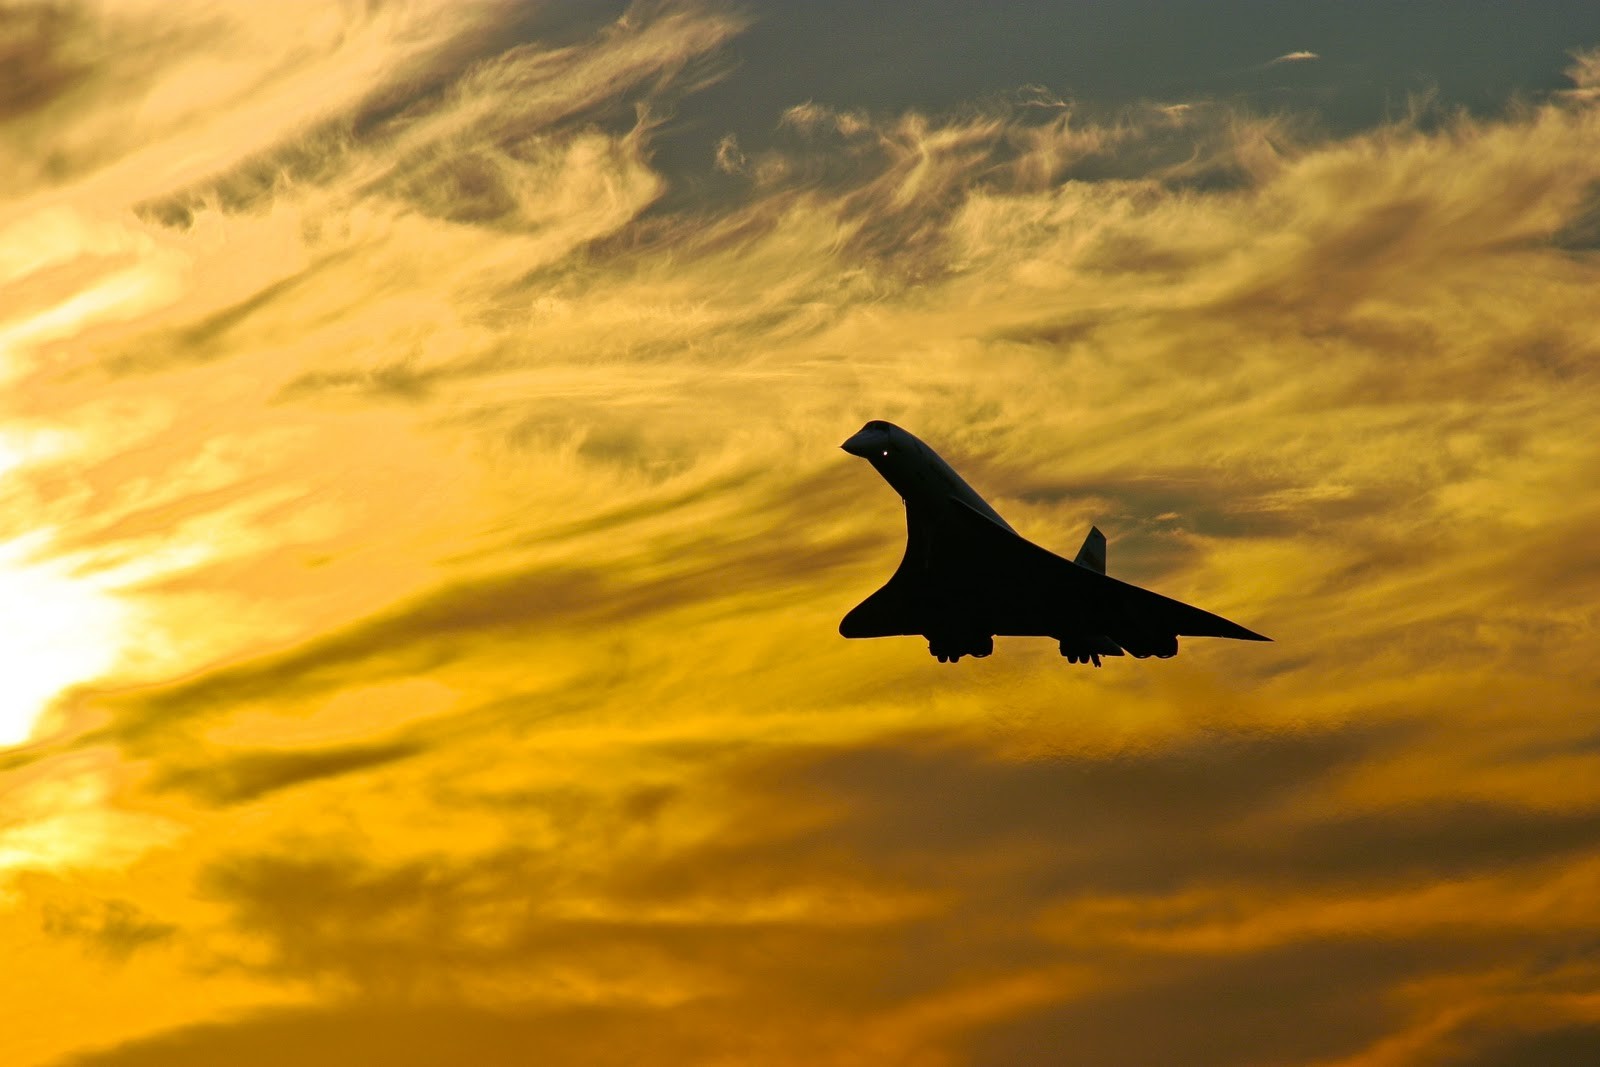 General 1600x1067 Concorde aircraft sky jets silhouette clouds flying photography sunlight vehicle passenger aircraft